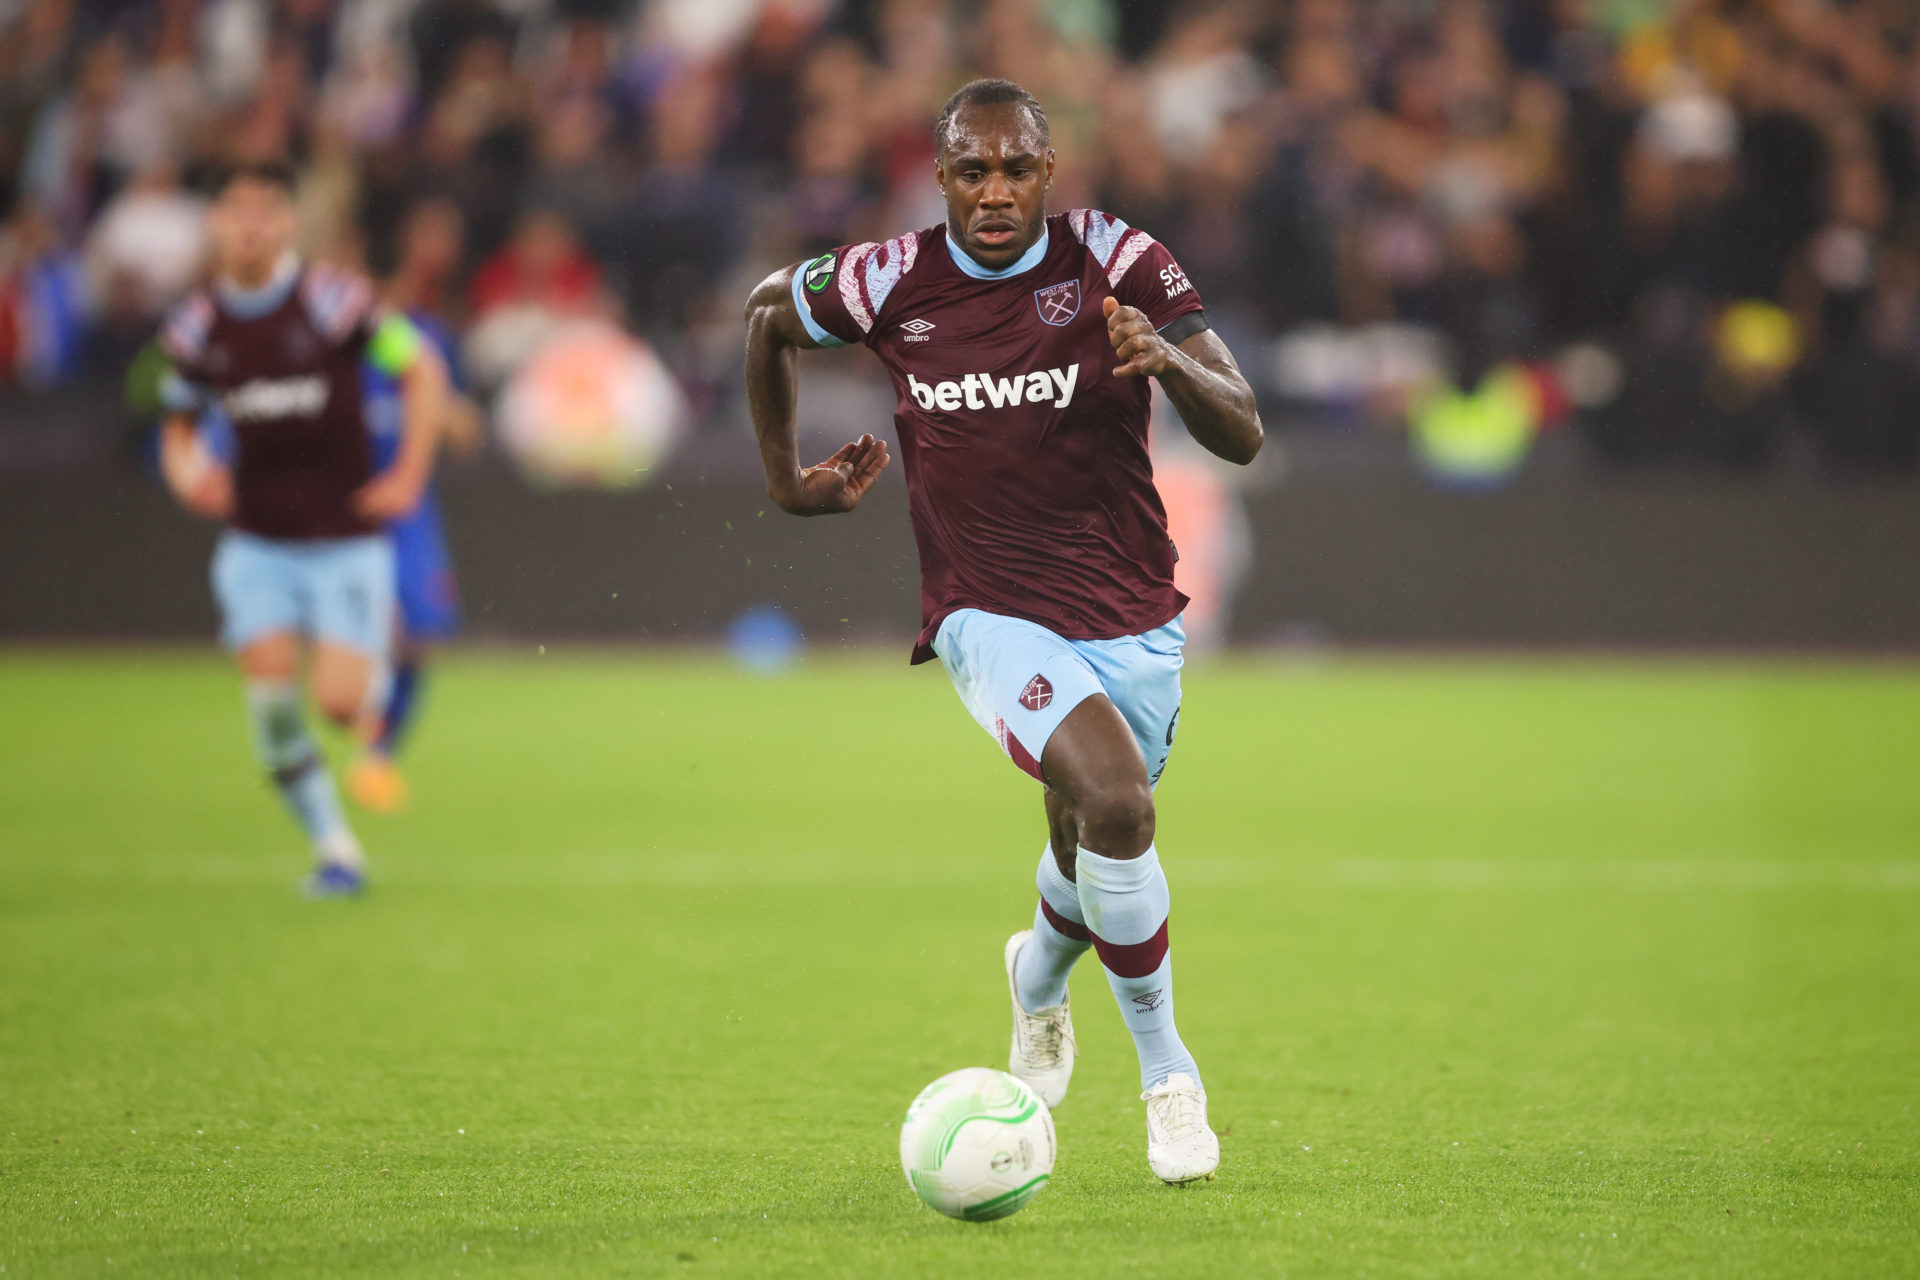 Michail Antonio makes is clear that he wished West Ham didn’t sell ‘magic’ Payet